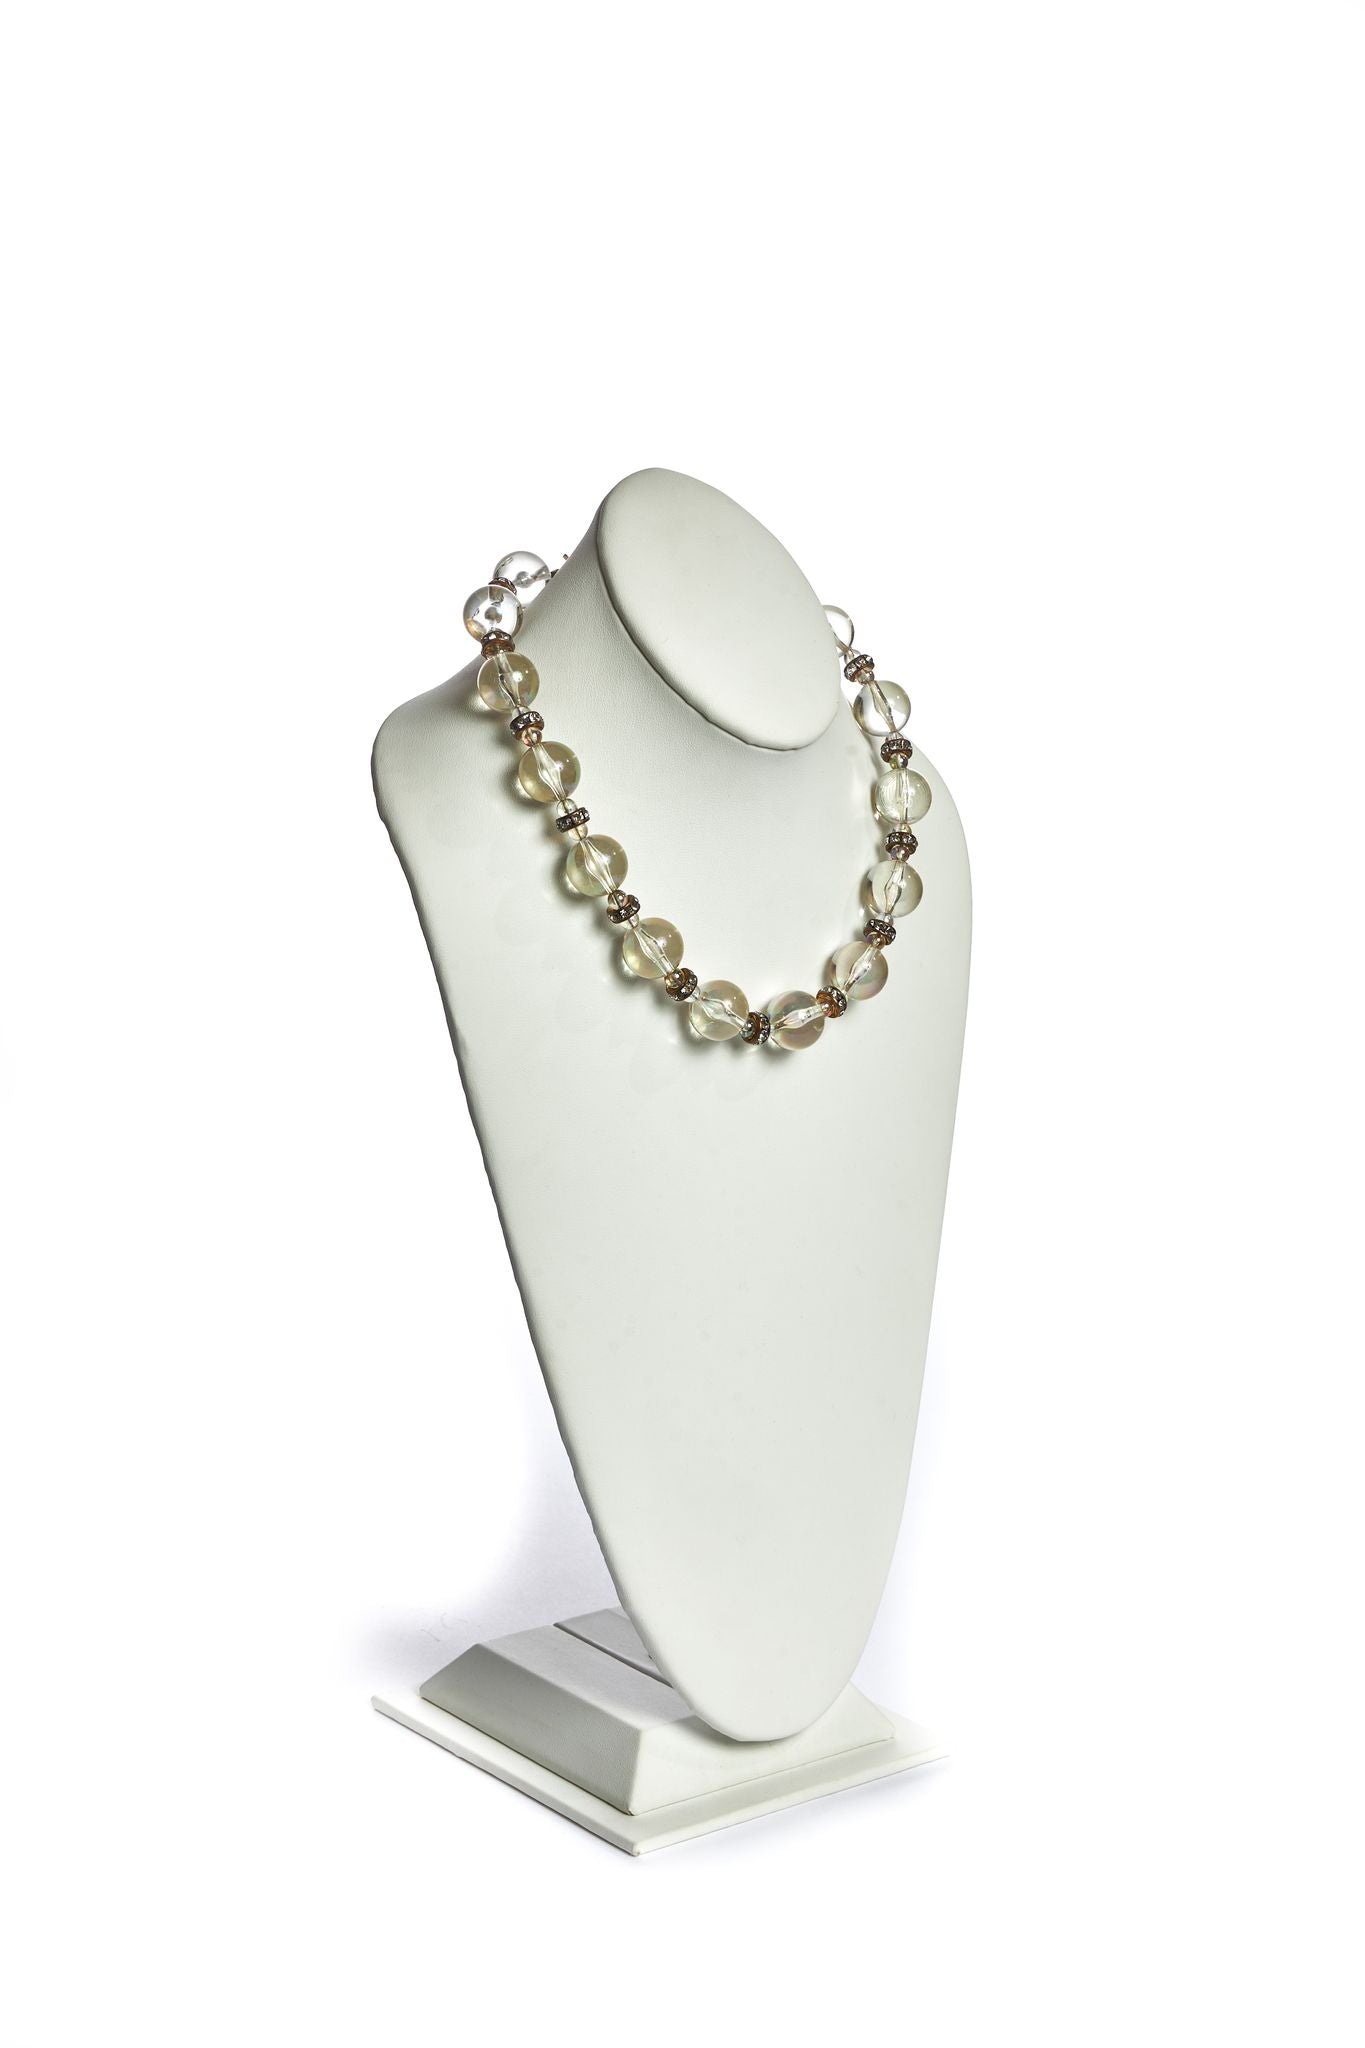 Chanel Lucite & Crystal Choker Necklace - Vintage Lux